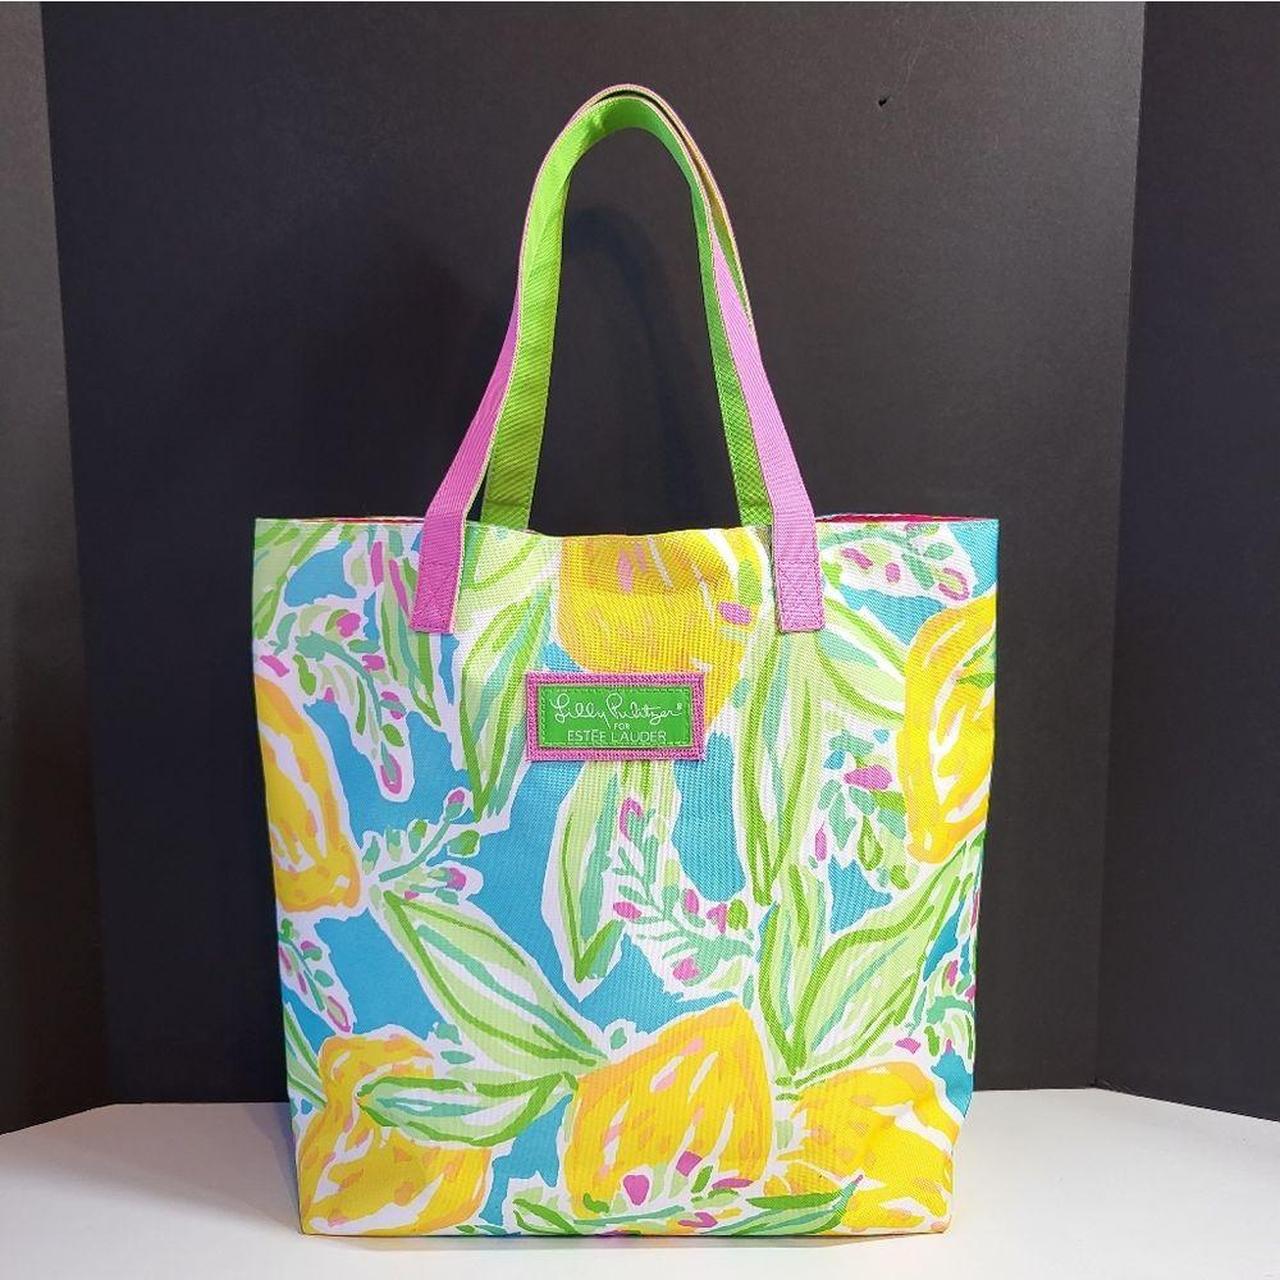 Lilly Pulitzer Women's Pink and Green Bag